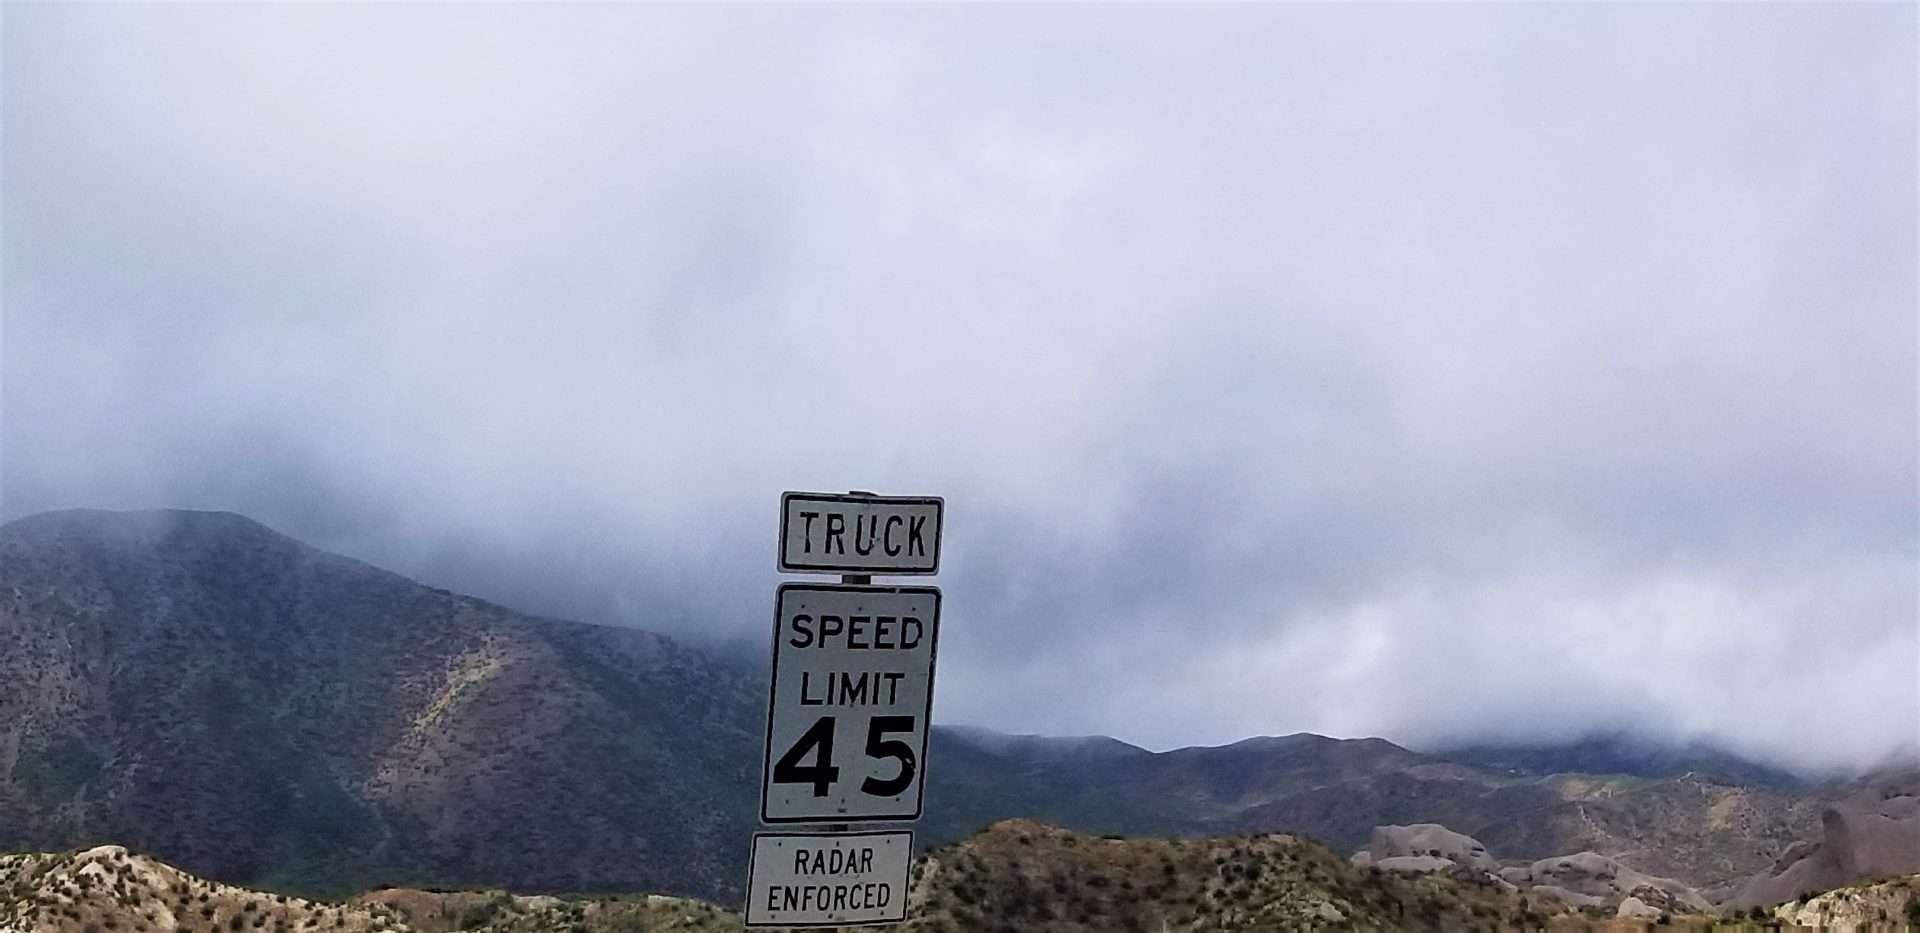 Truck speed limit sign on highway